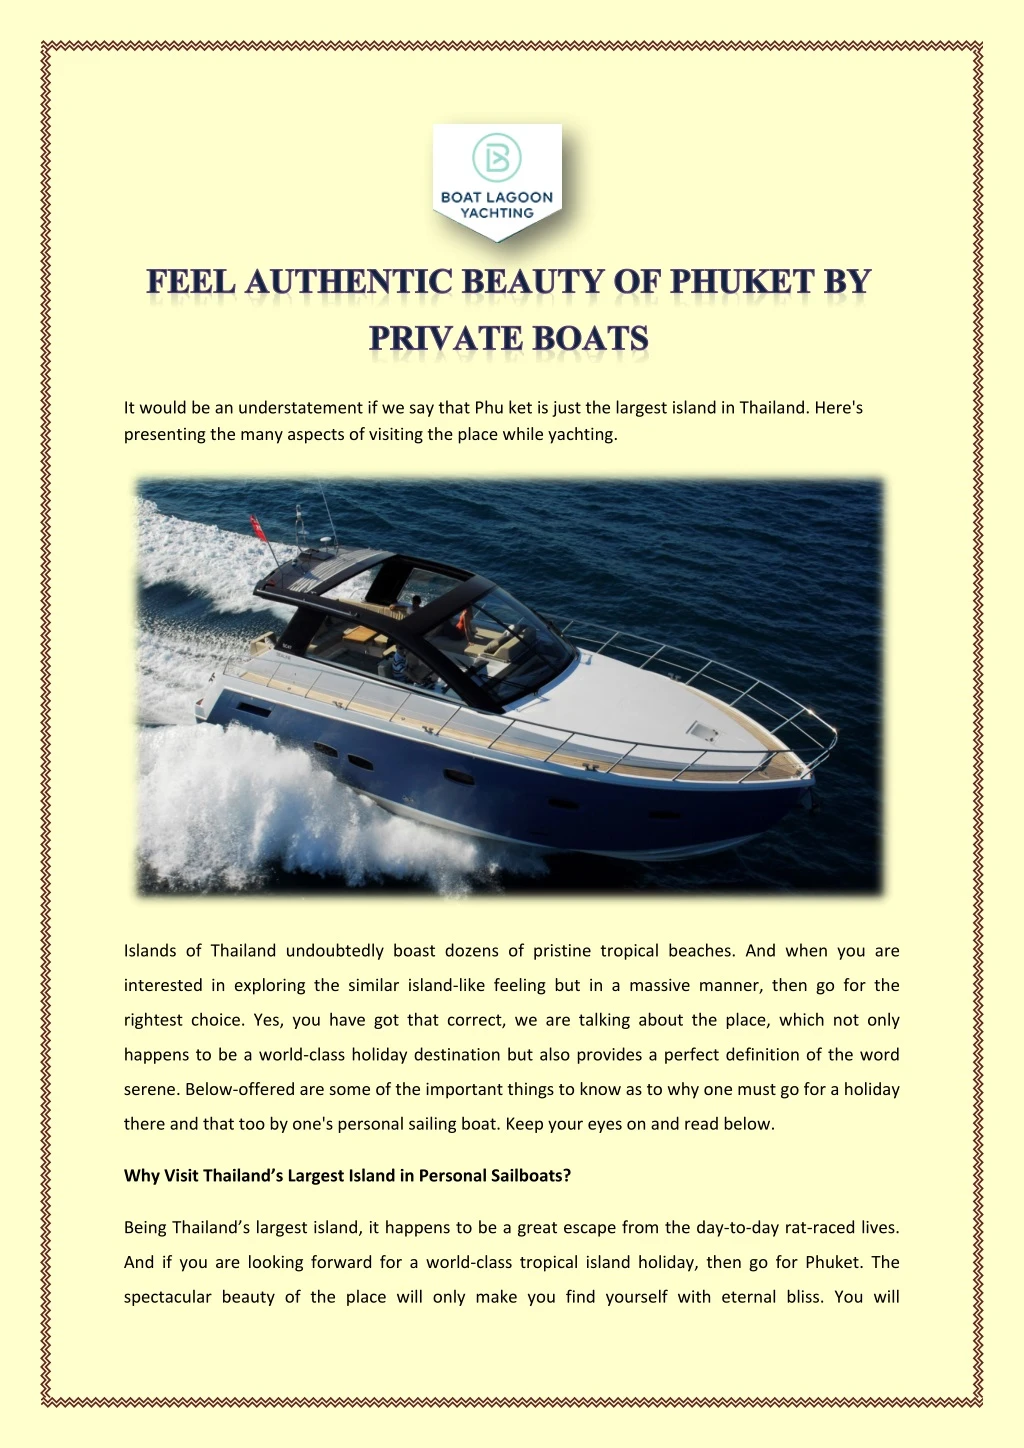 feel authentic beauty of phuket by